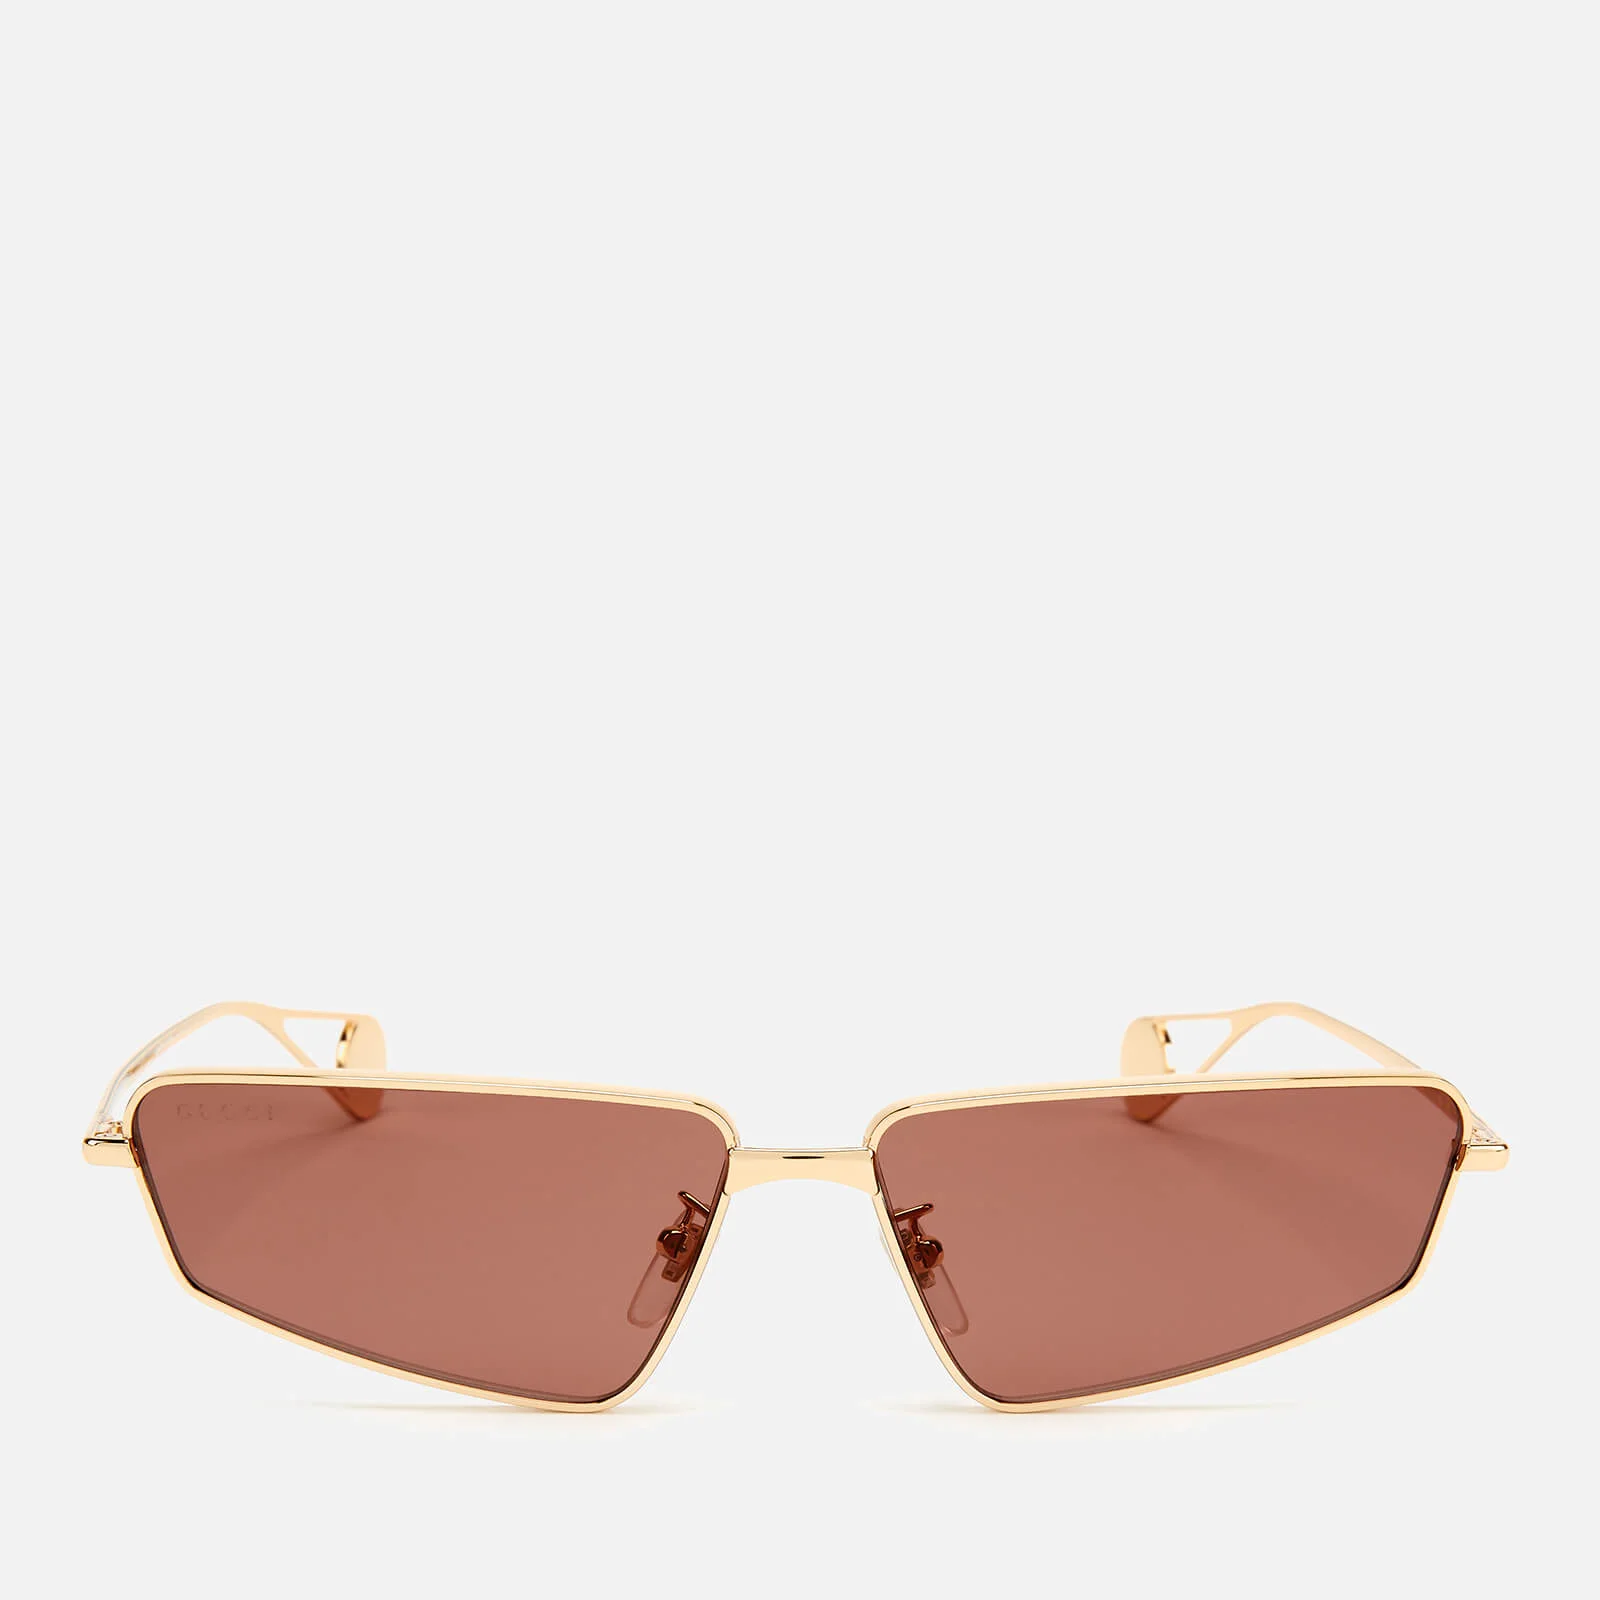 Gucci Women's Small Frame Metal Sunglasses - Gold/Red Image 1